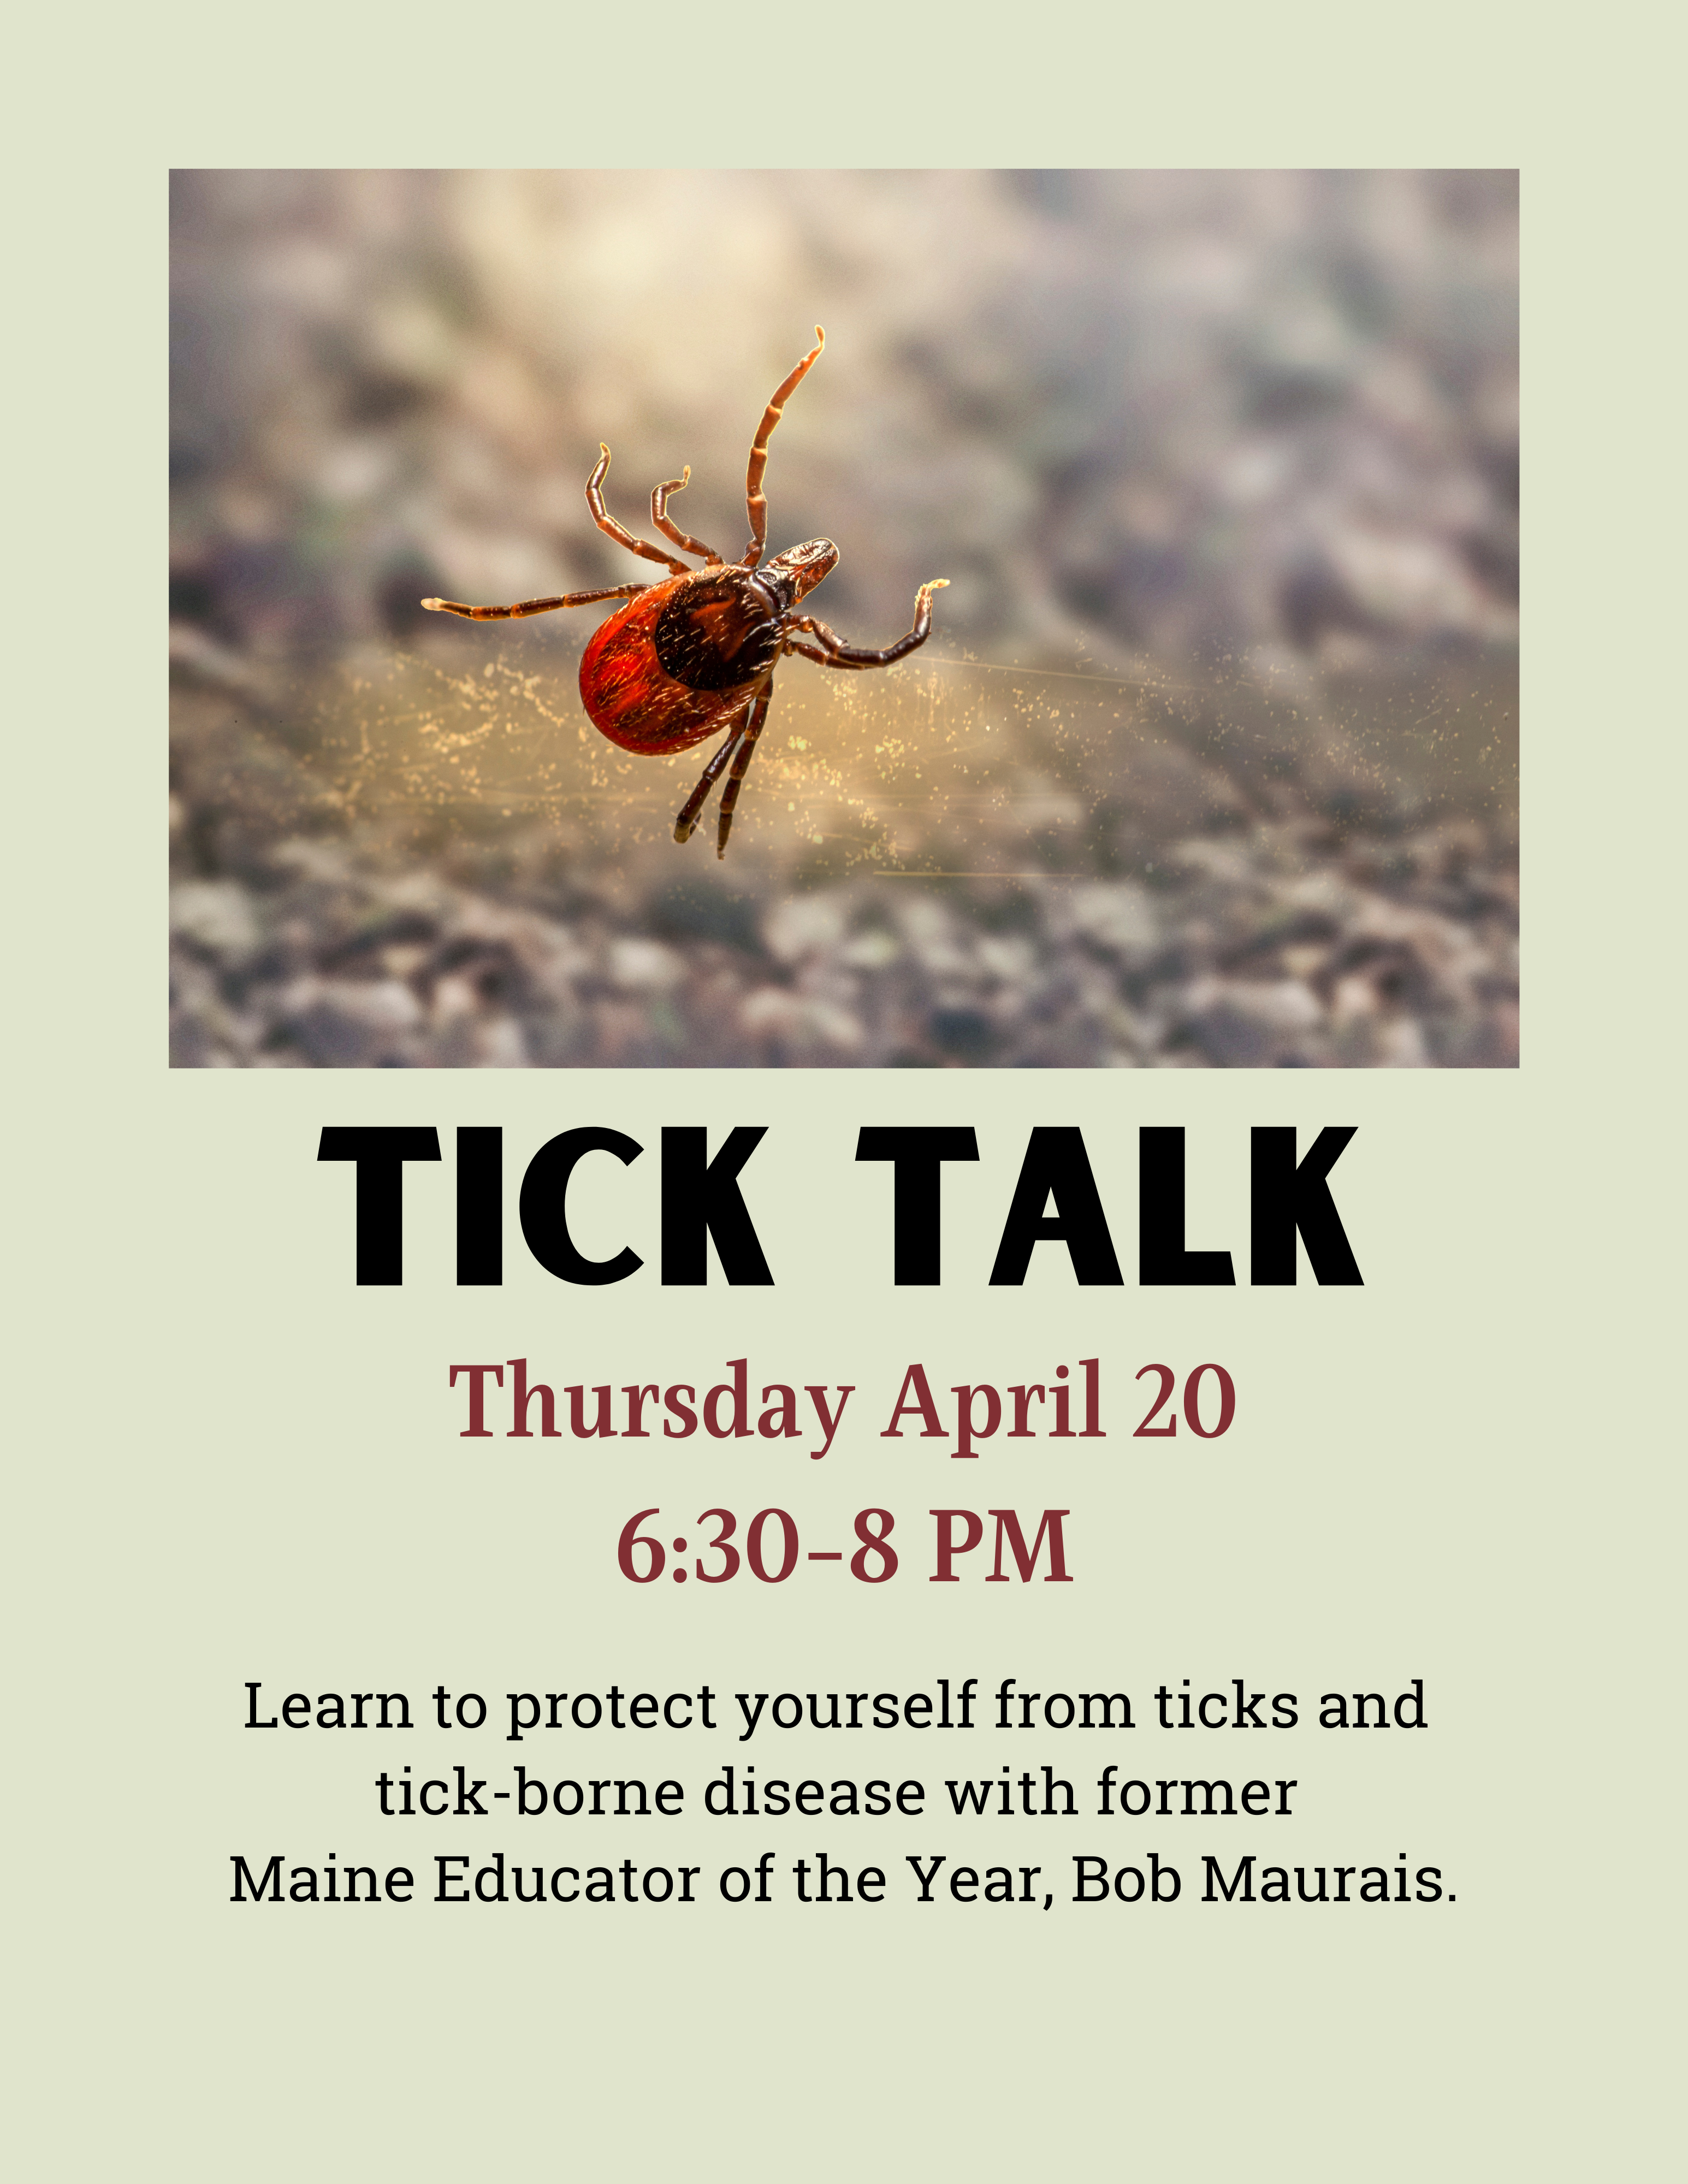 Tick Talk Thursday April 20 6:30-8 PM Learn to protect yourself from ticks and tick borne disease with Maine Educator of the Year Bob MauraisPortsmouth Public Library 175 Parrott Ave. Portsmouth